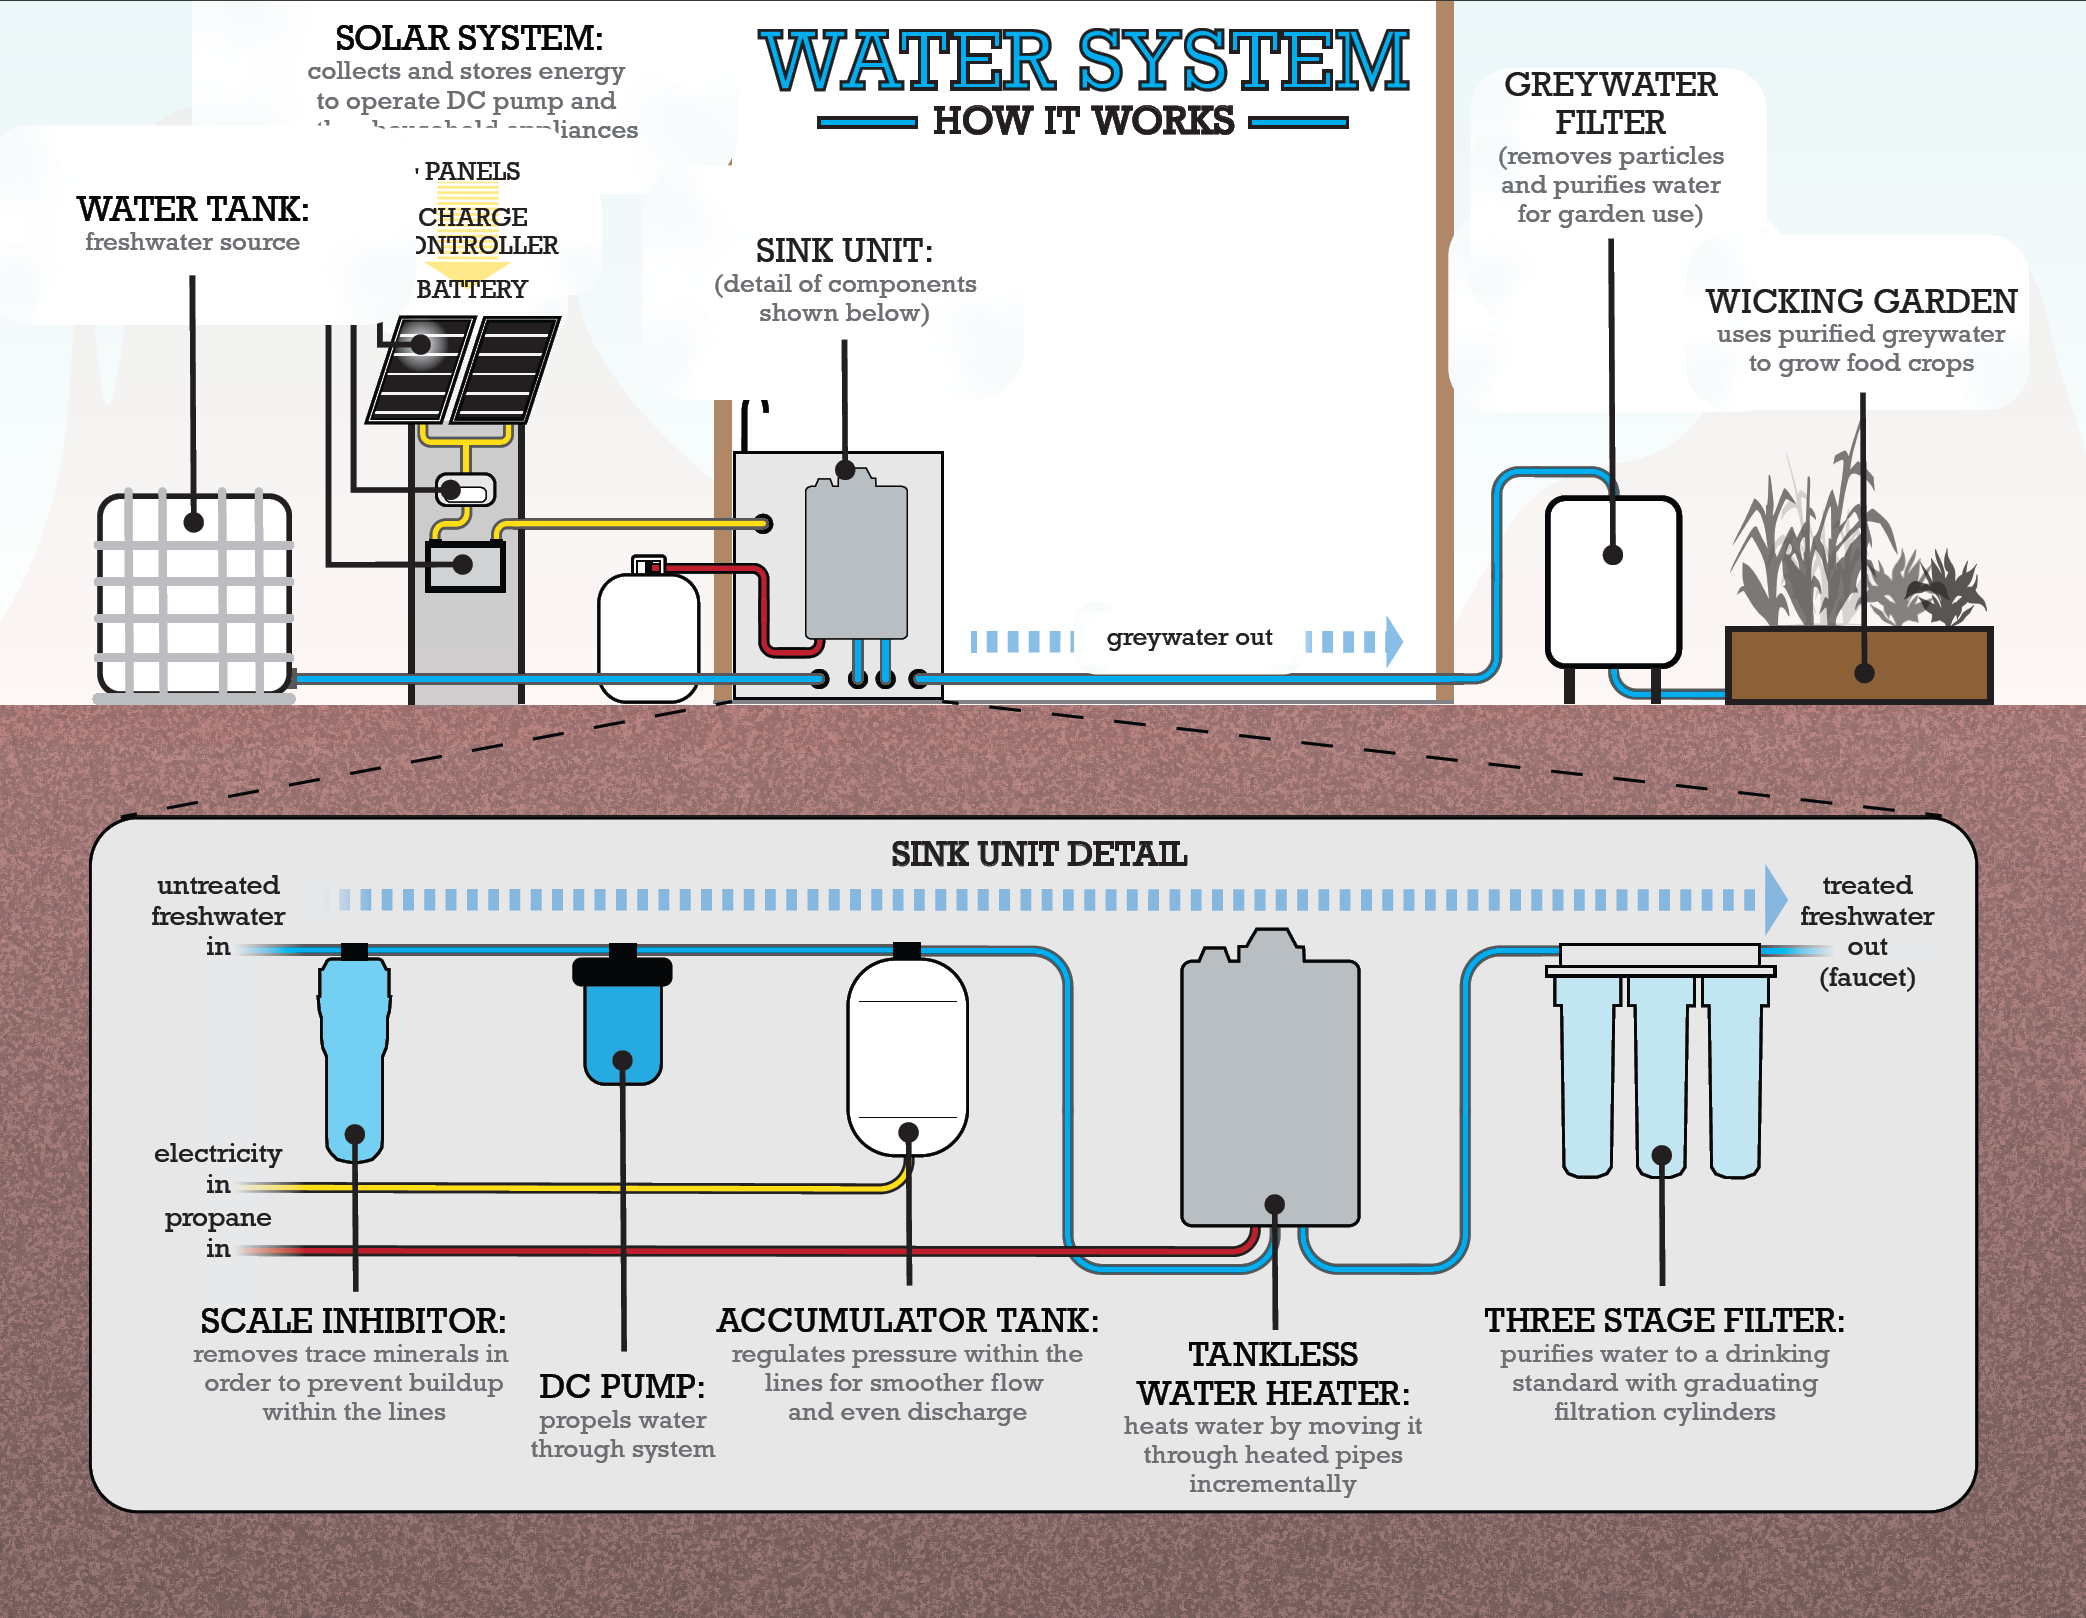 A technical diagram of the water systems that Fundamental Needs participants install.